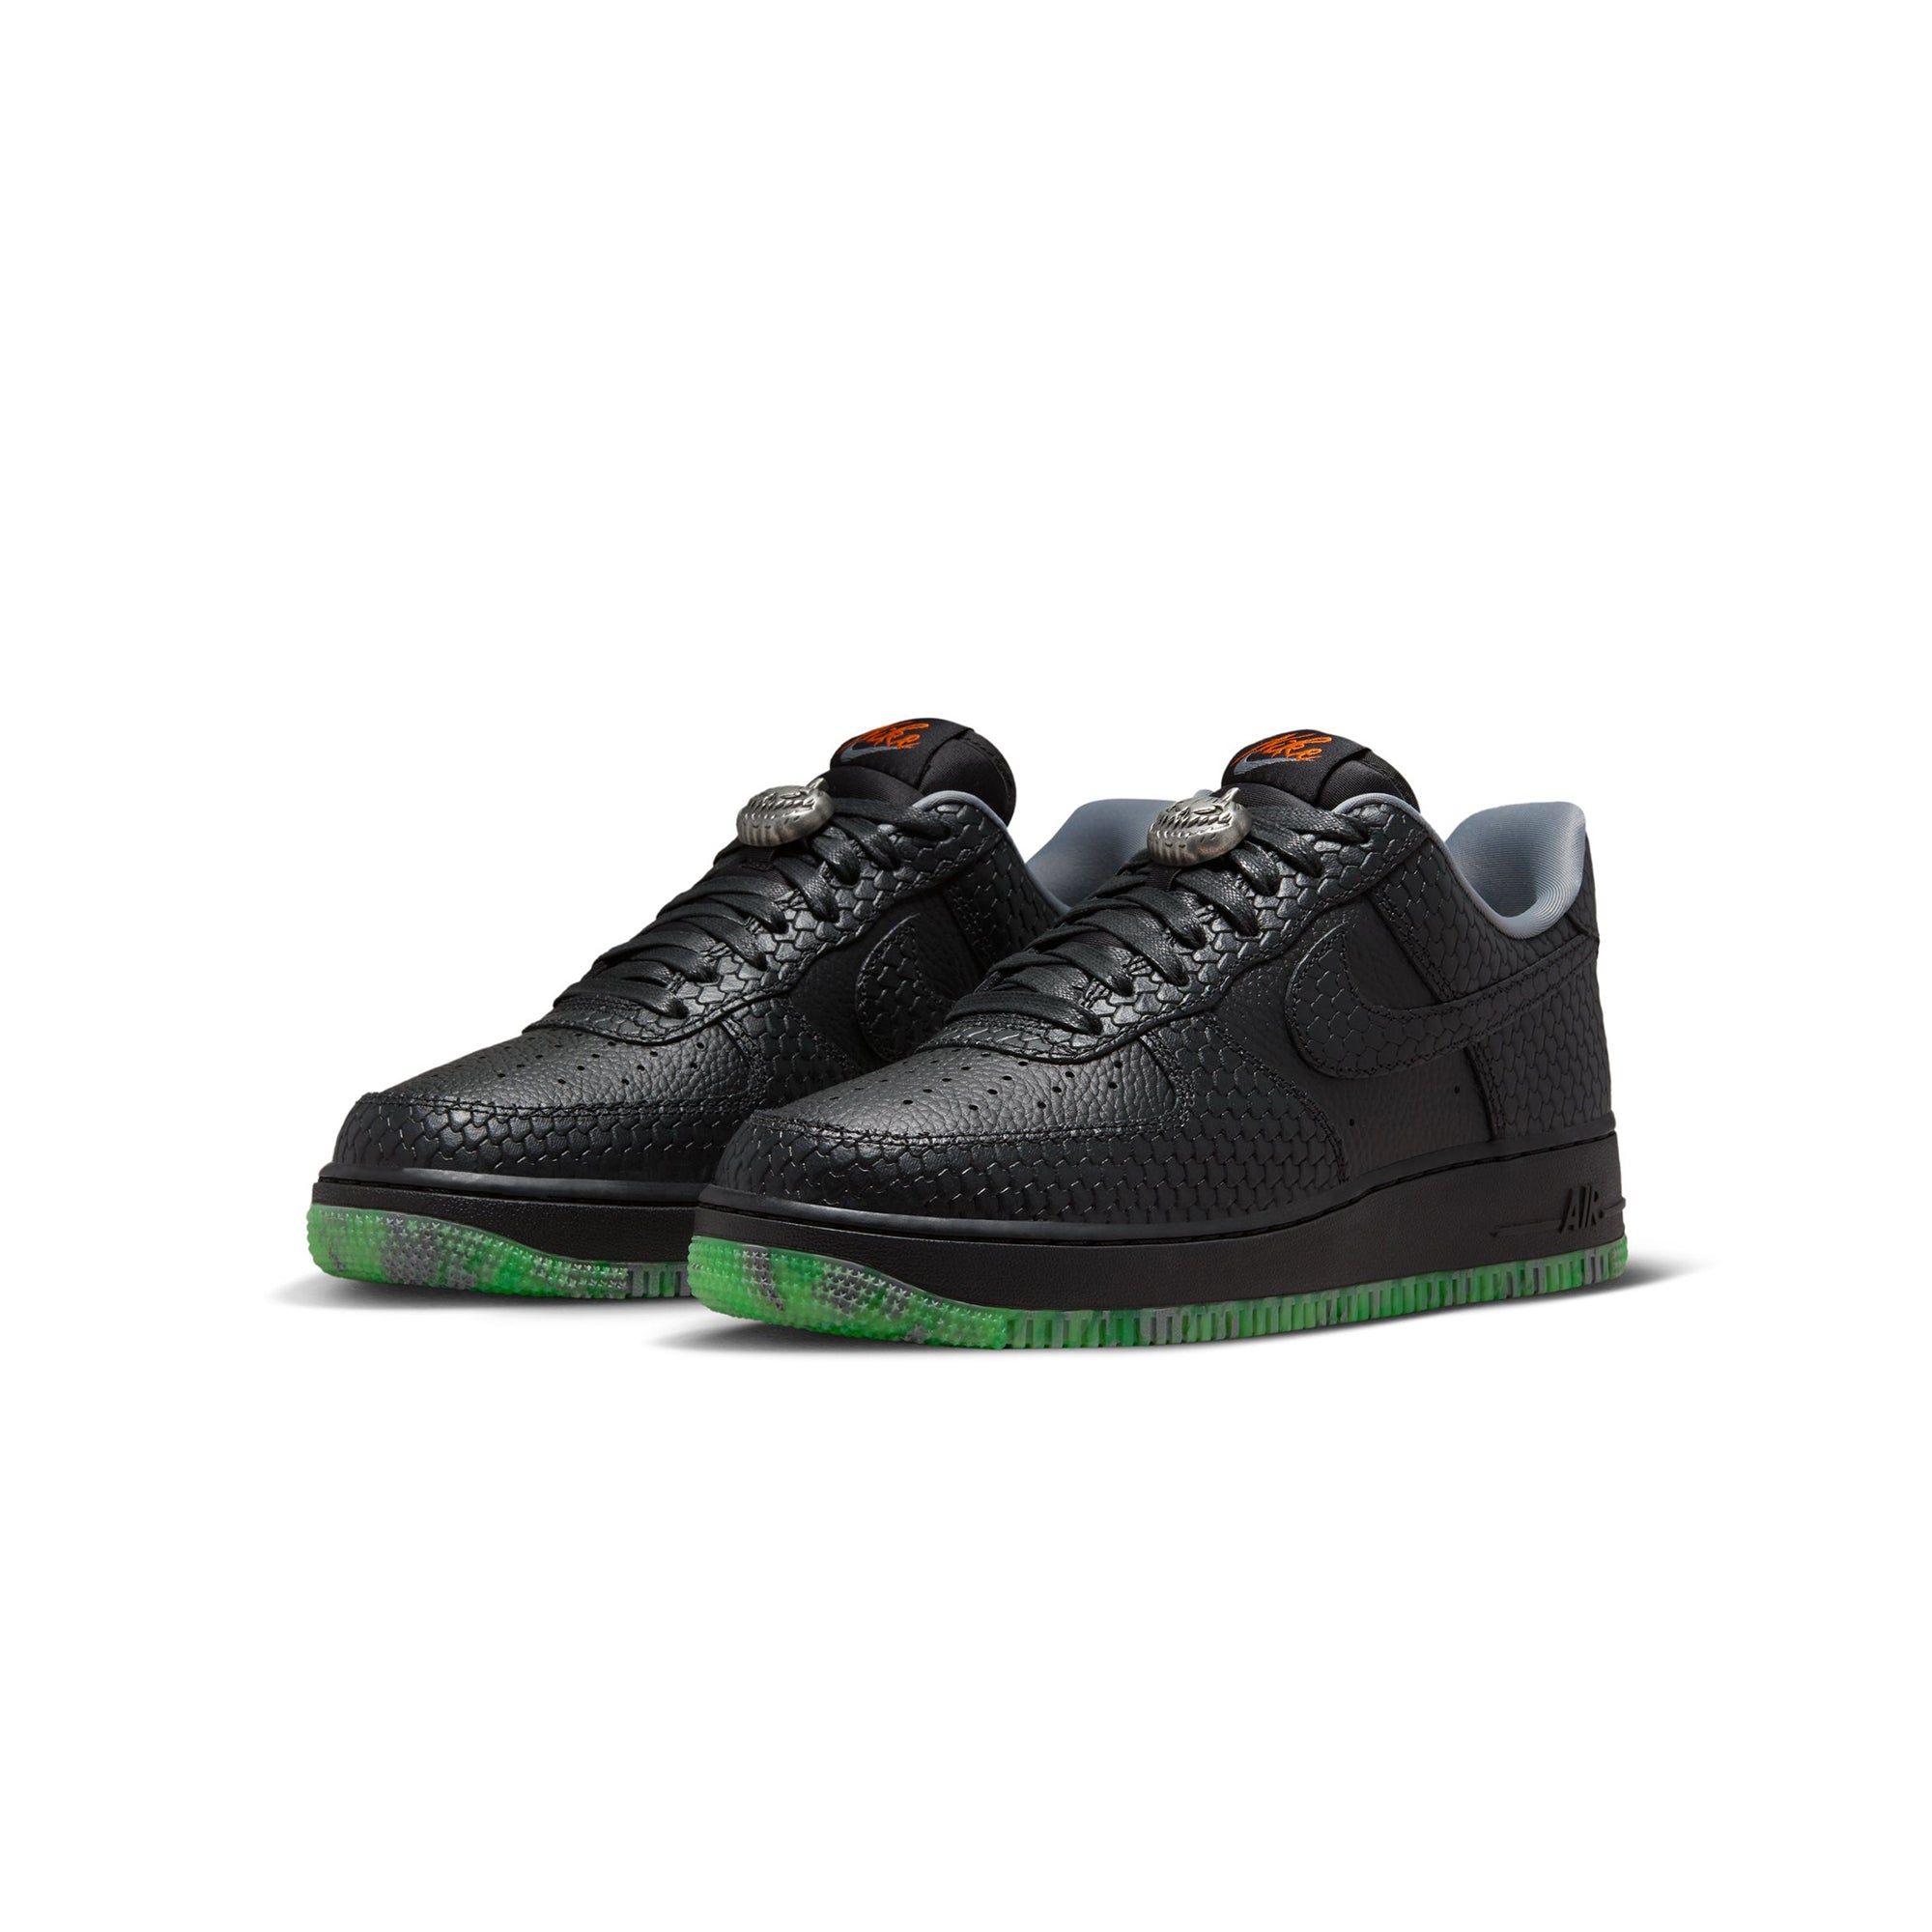 Nike Mens Air Force 1 '07 PRM Halloween Shoes - 7.5